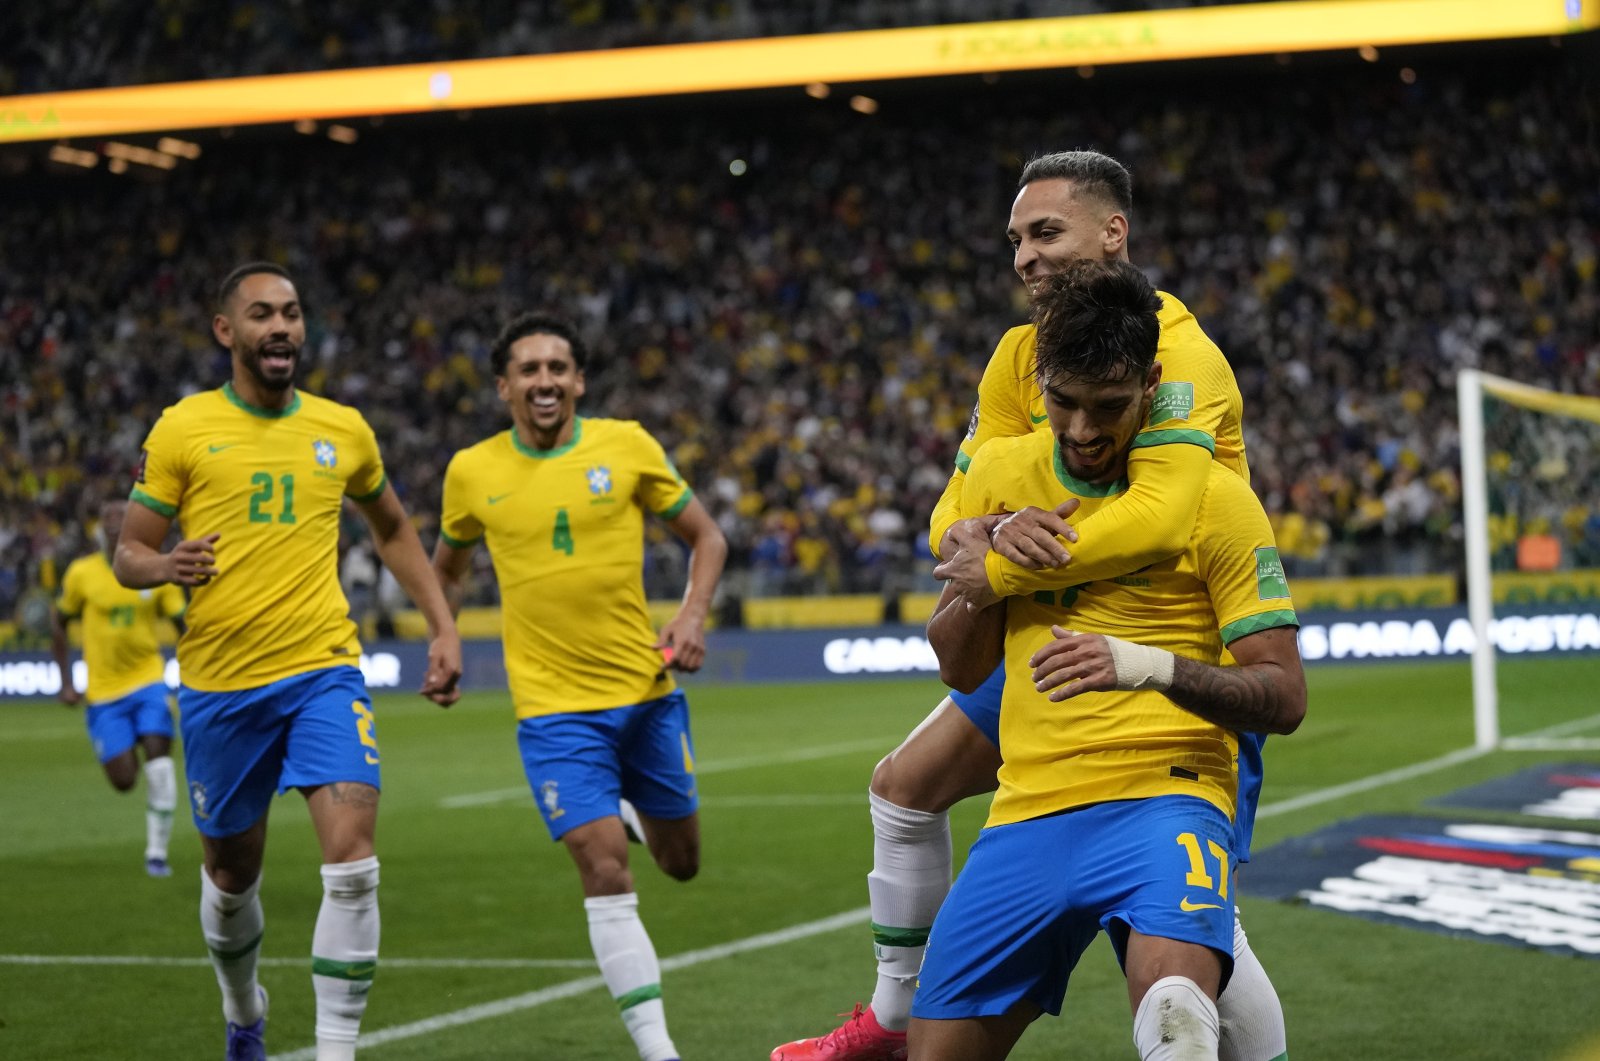 Brazil's Lucas Paqueta (R) celebrates with teammates after scoring against Colombia during a Qatar 2022 World Cup qualifier in Sao Paulo, Brazil, Nov.11, 2021. (AP Photo)